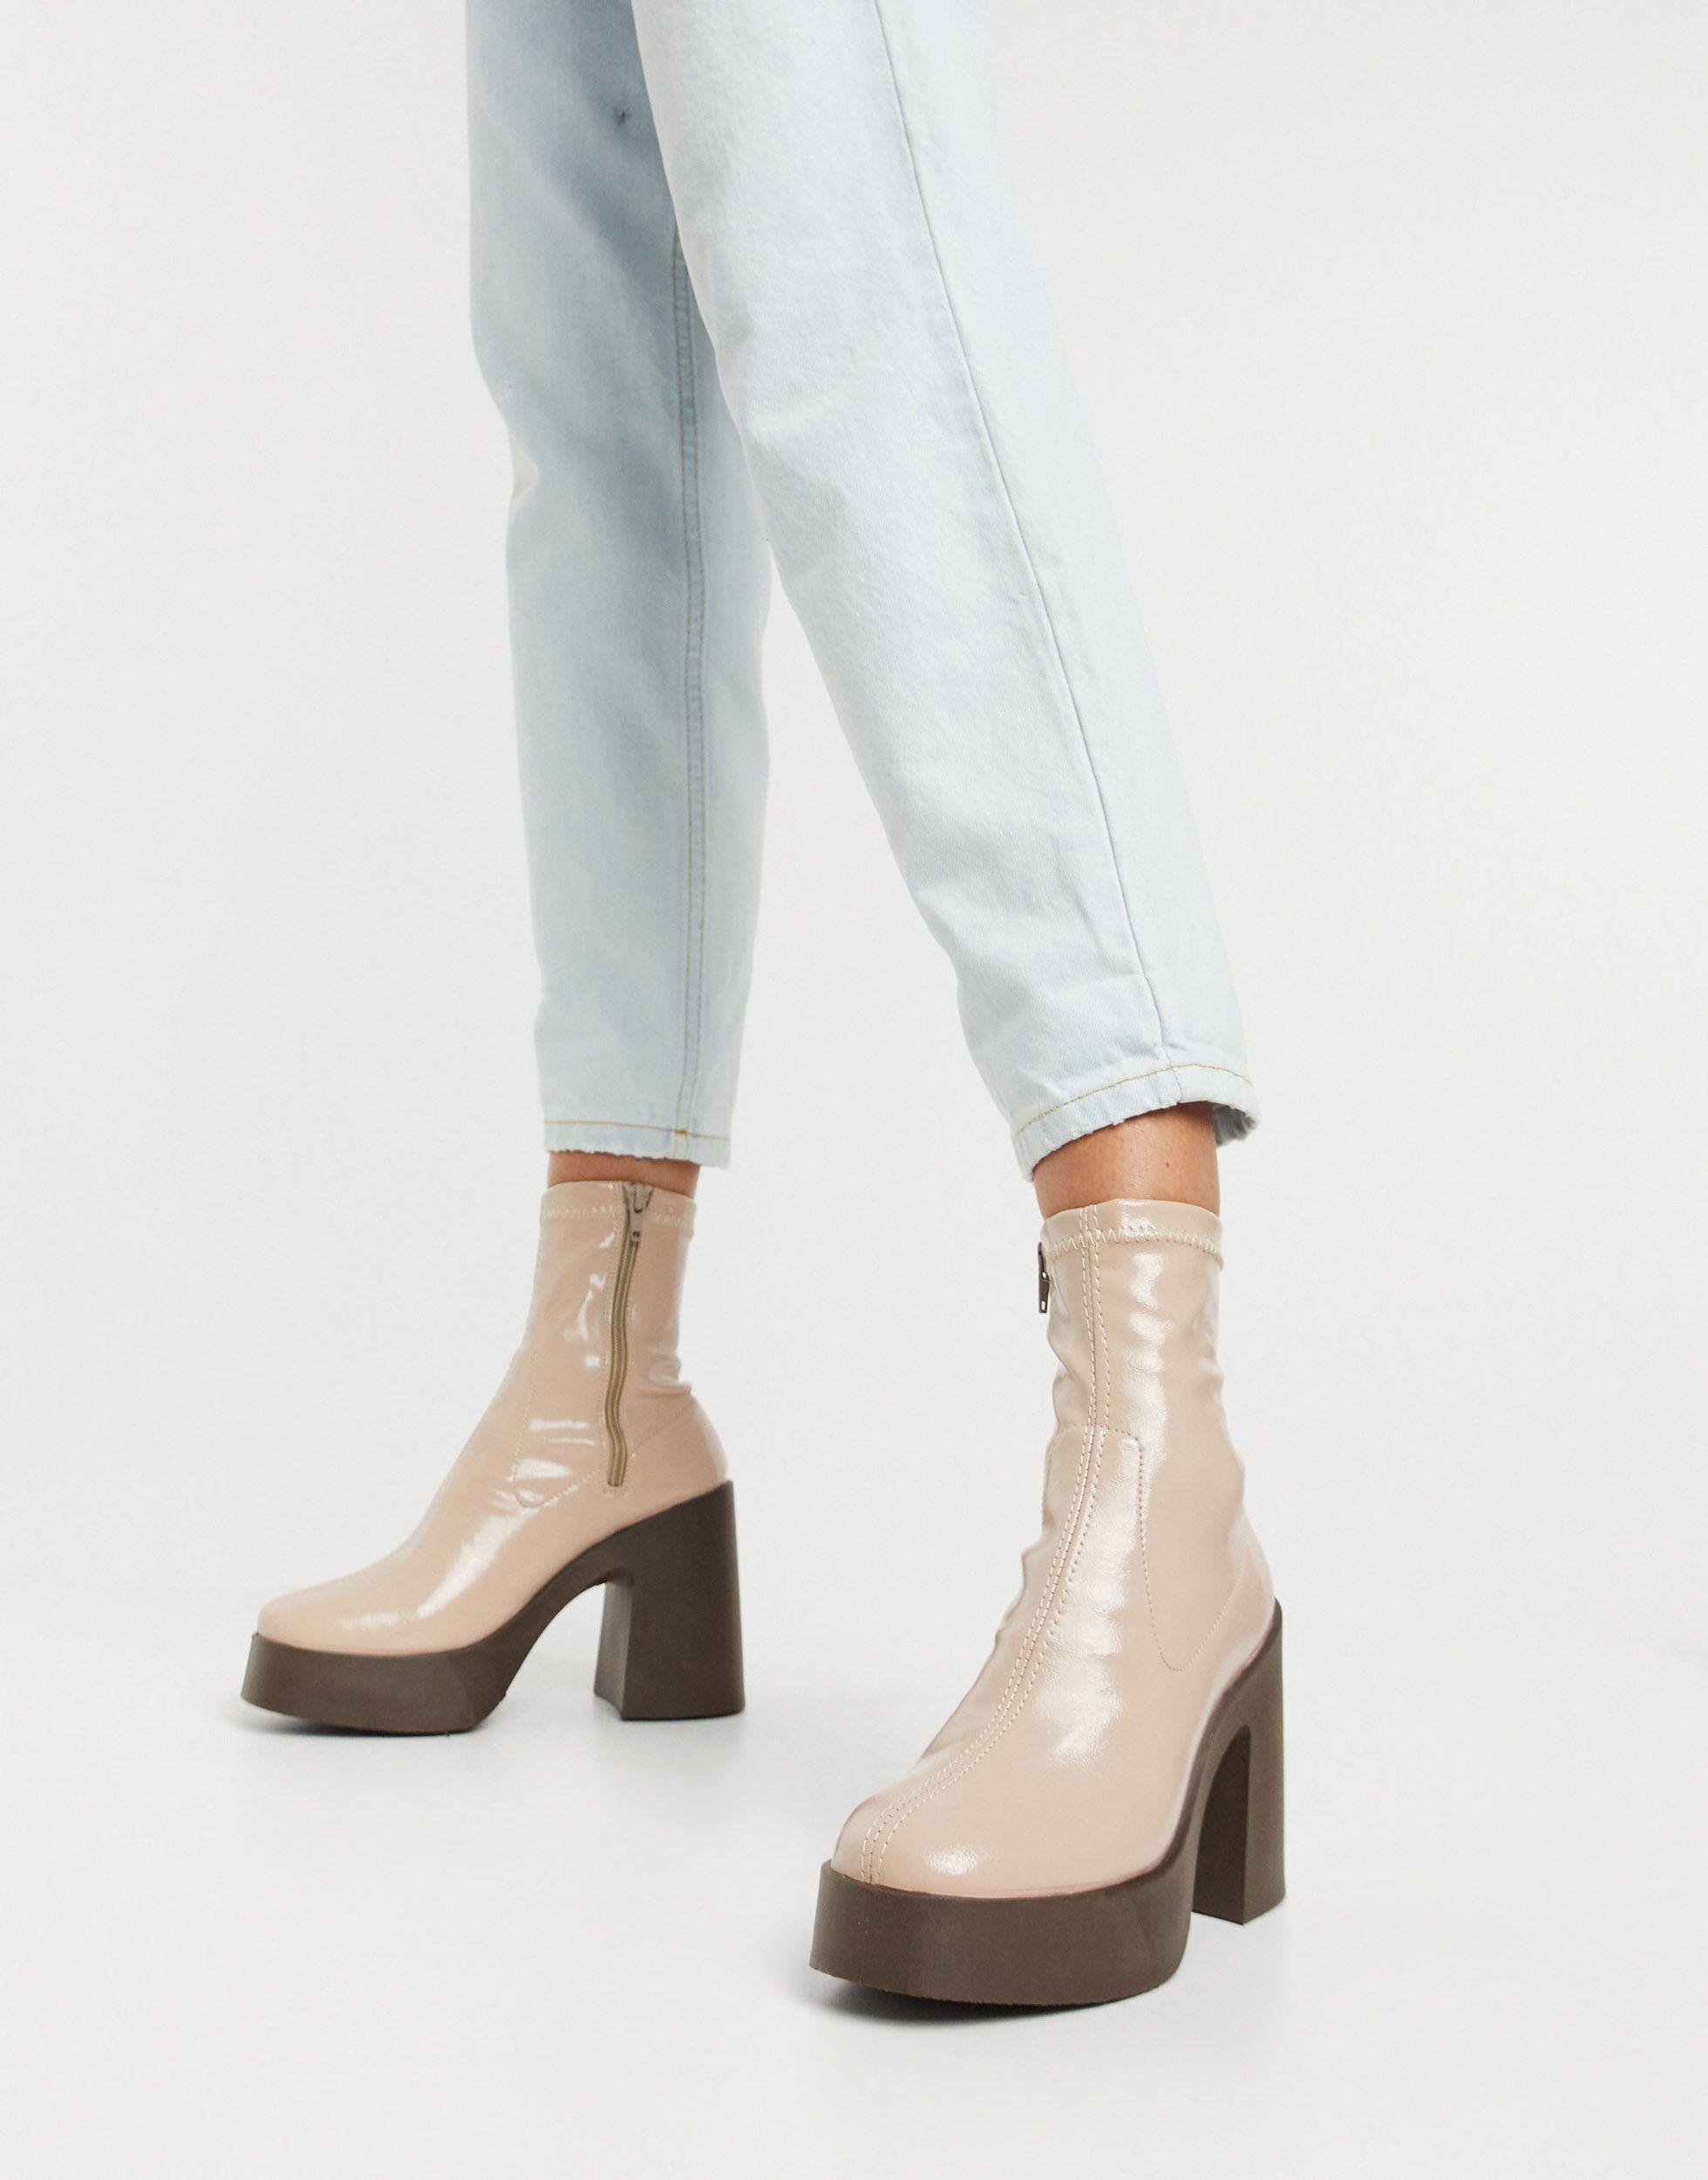 ASOS Elsie High Heeled Sock Boots in White | Lyst